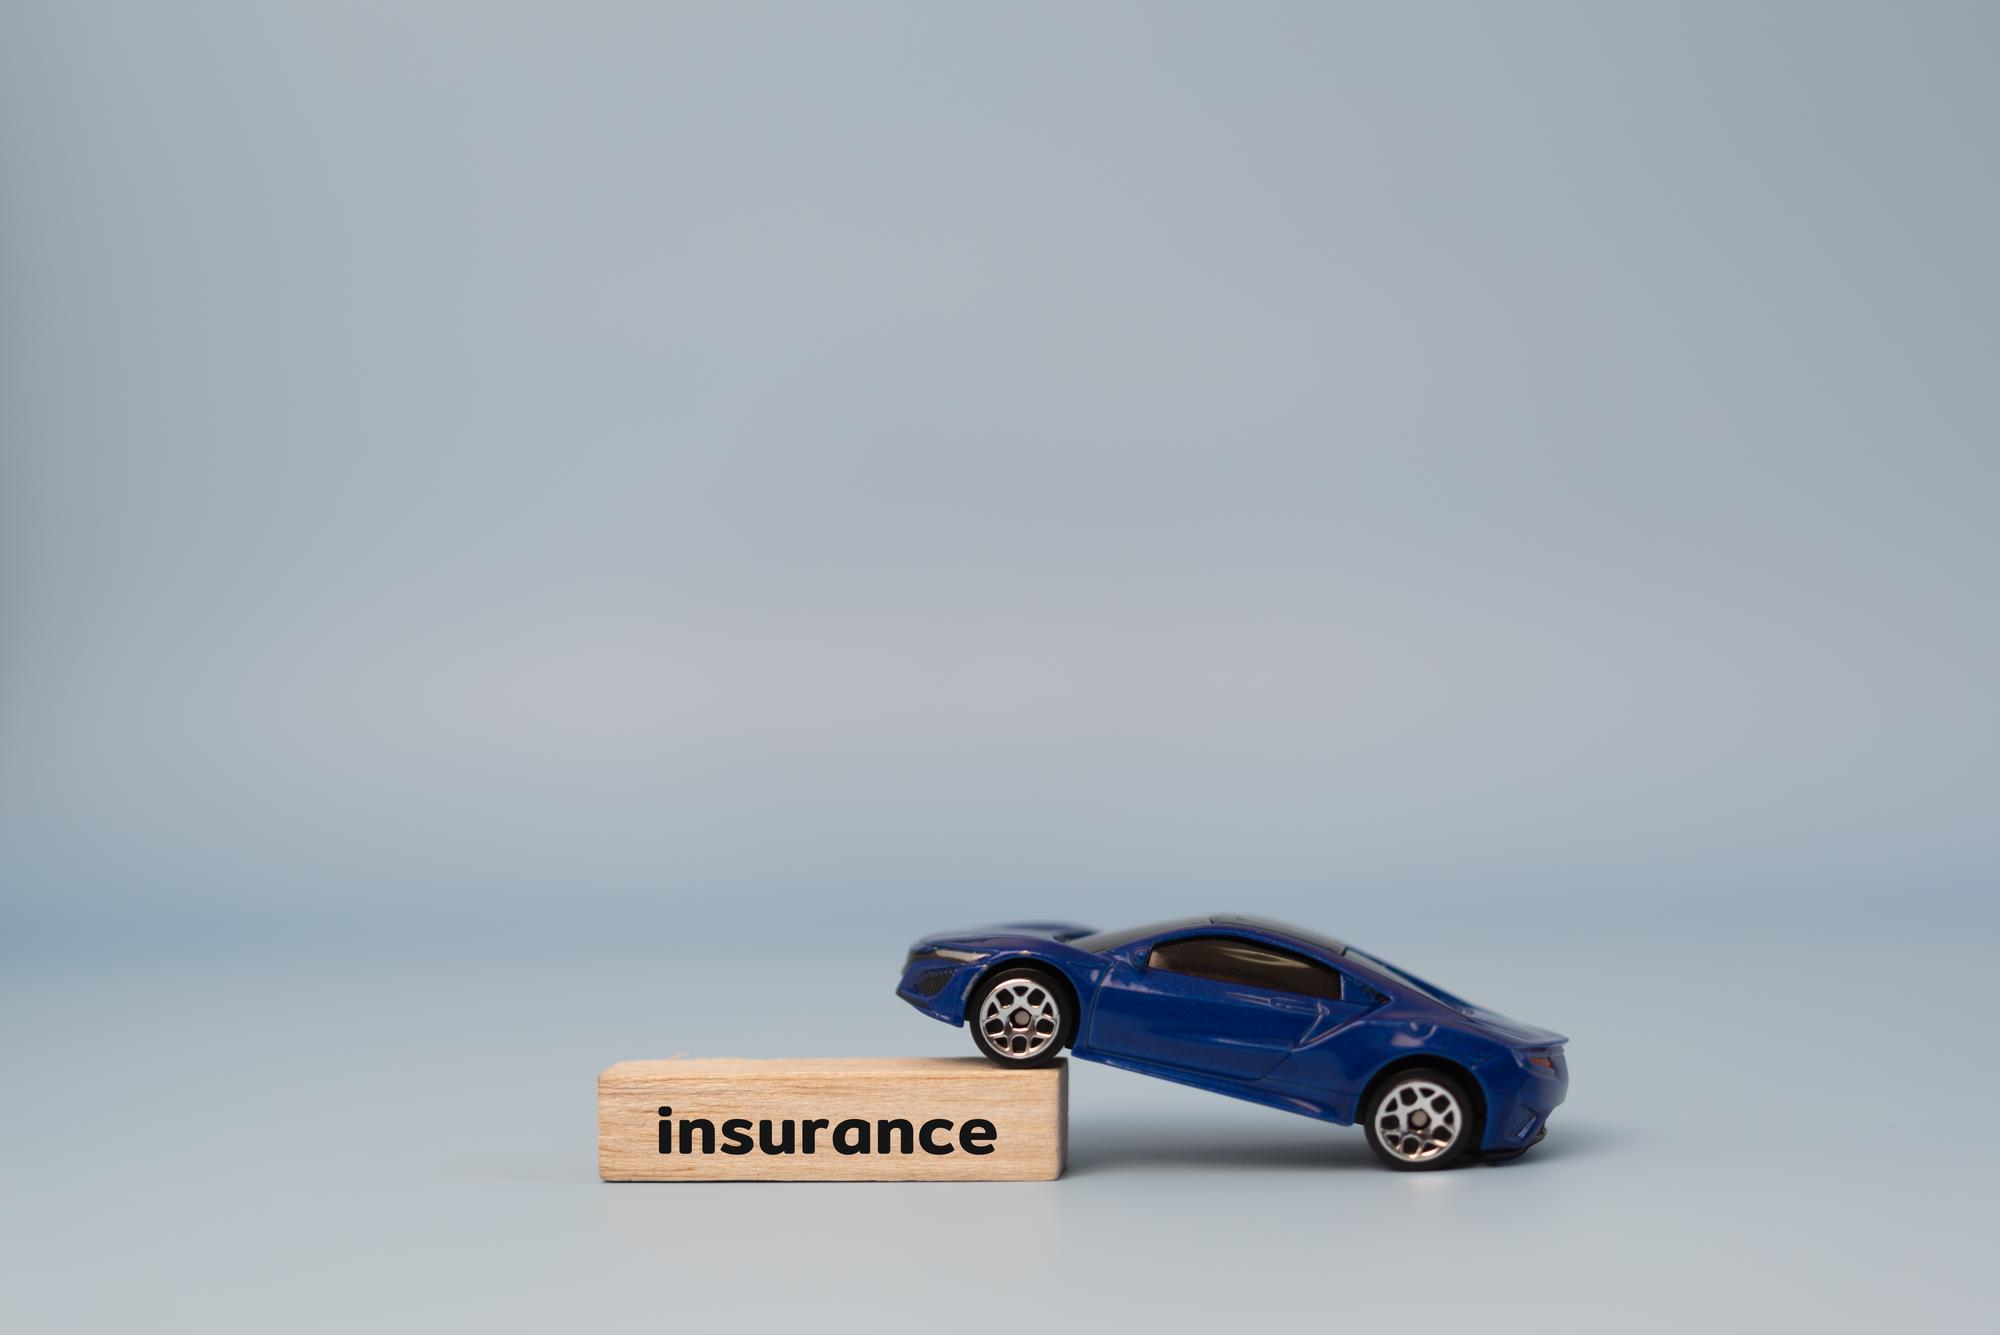 Are There Any Positives To Purchasing Or Renewing Auto Insurance Online?